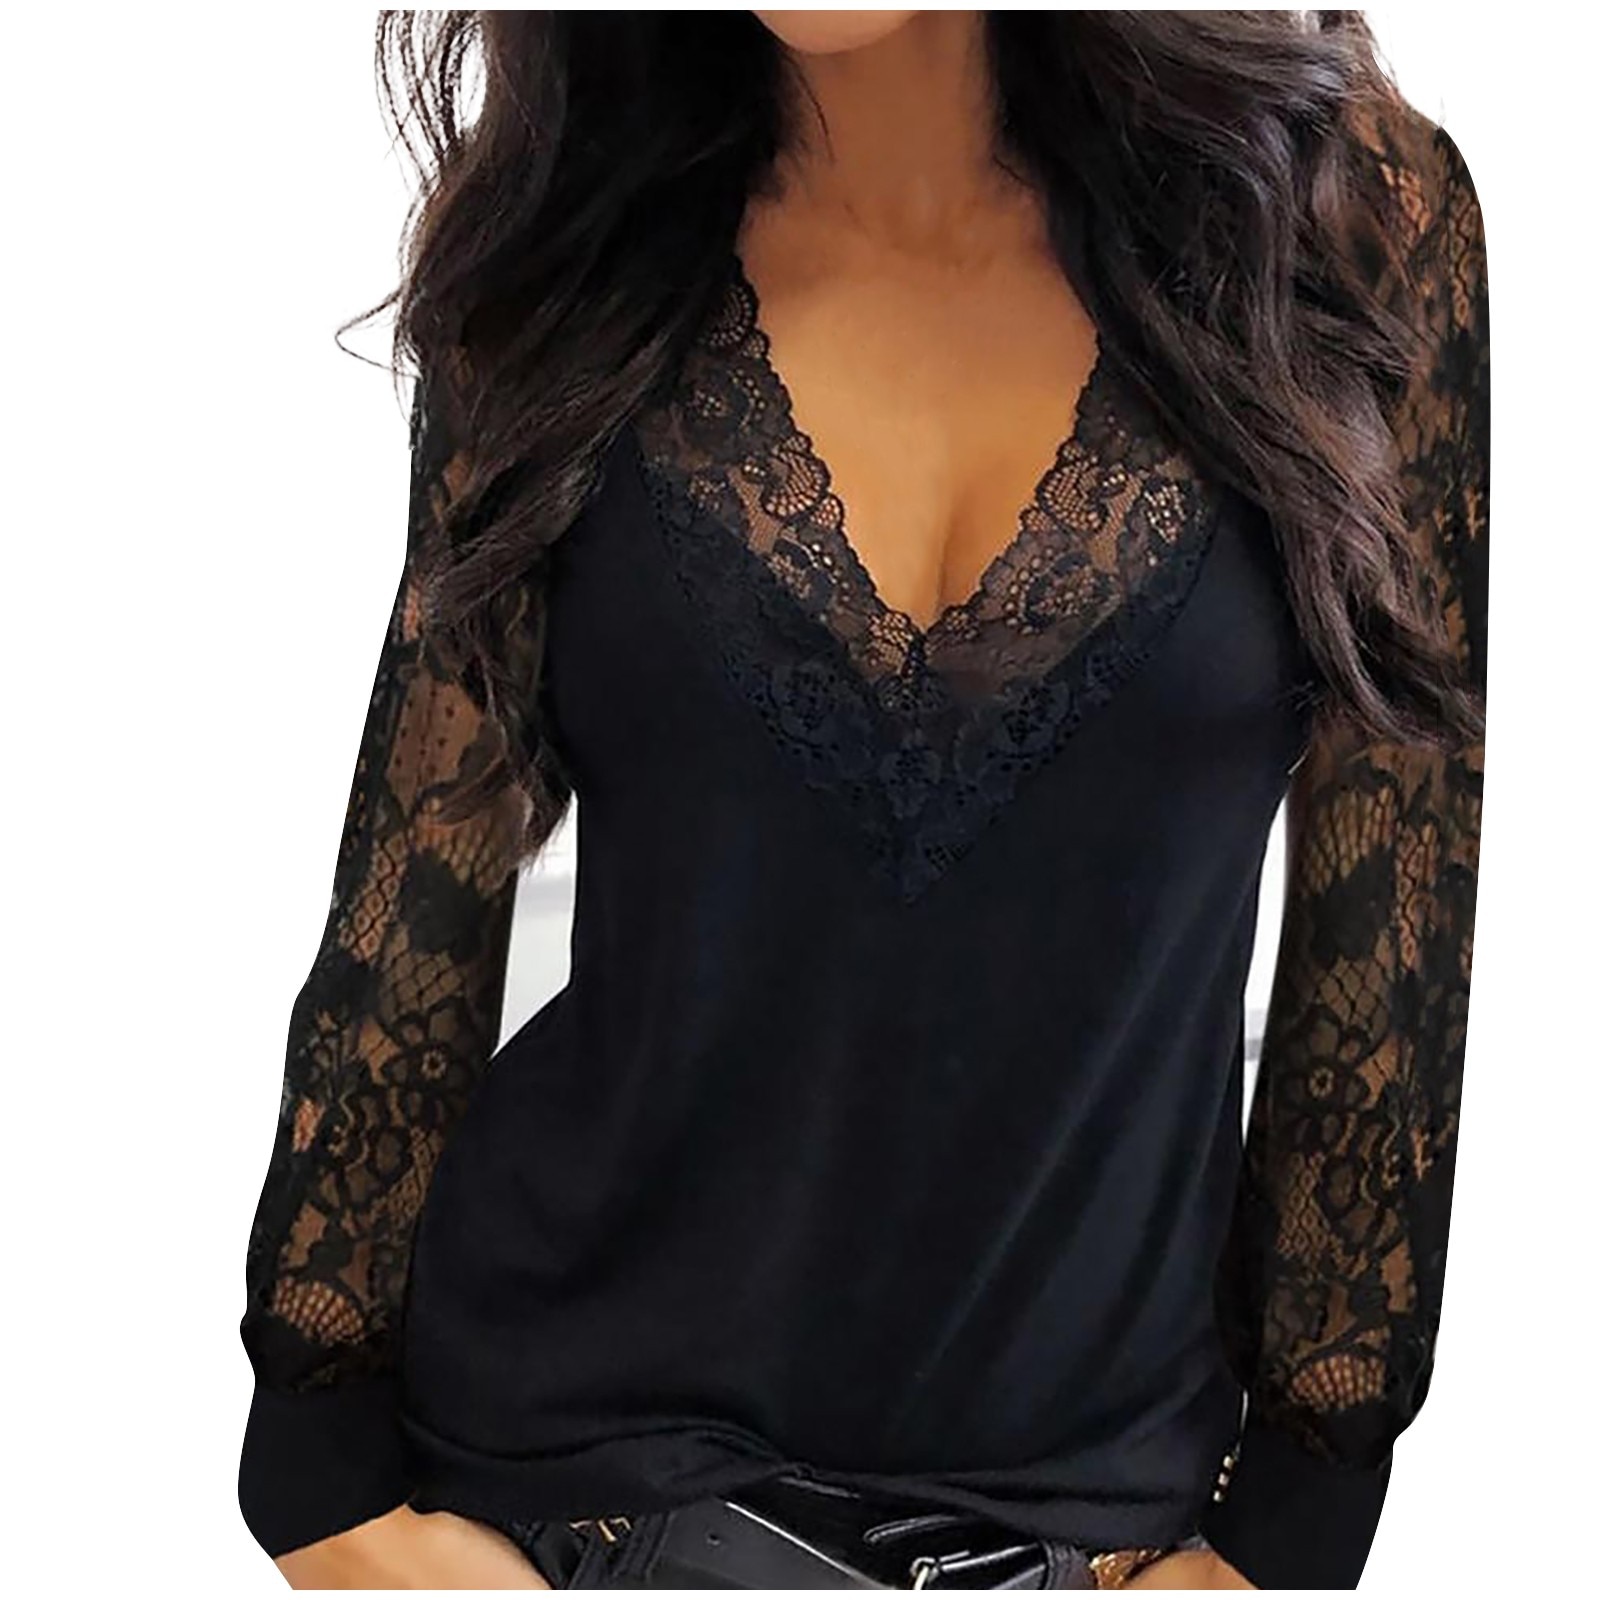 Lace Shirts For Women Long Sleeve T Shirts Ladies Casual Sexy V Neck Slim Fit Shirt Tops Pullovers